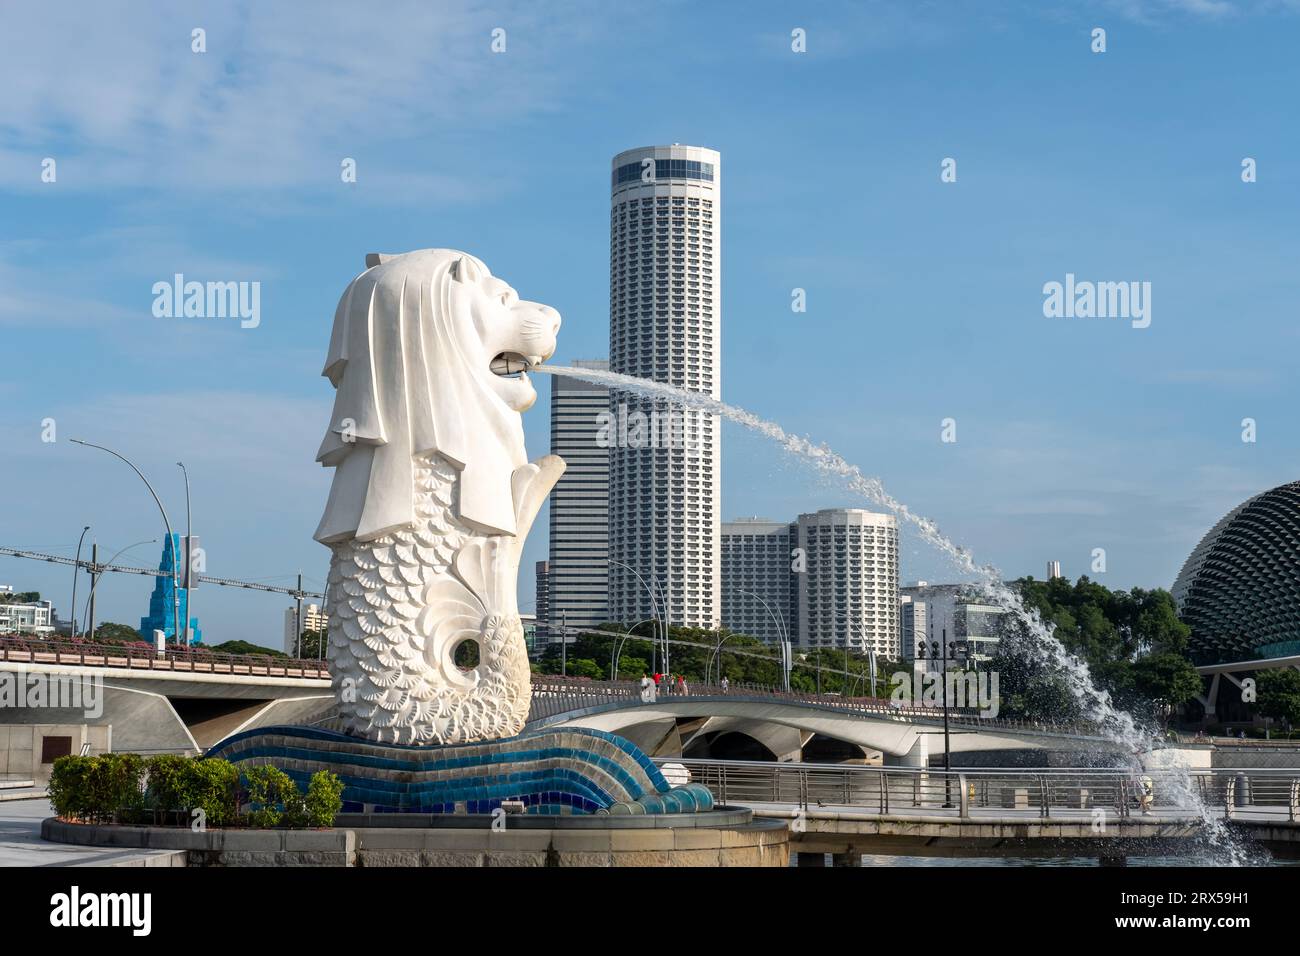 Singapore - 22 October 2022: Merlion Statue at Merlion Park, it is a mythical creature with a lion's head and the body of a fish. It is used as a masc Stock Photo